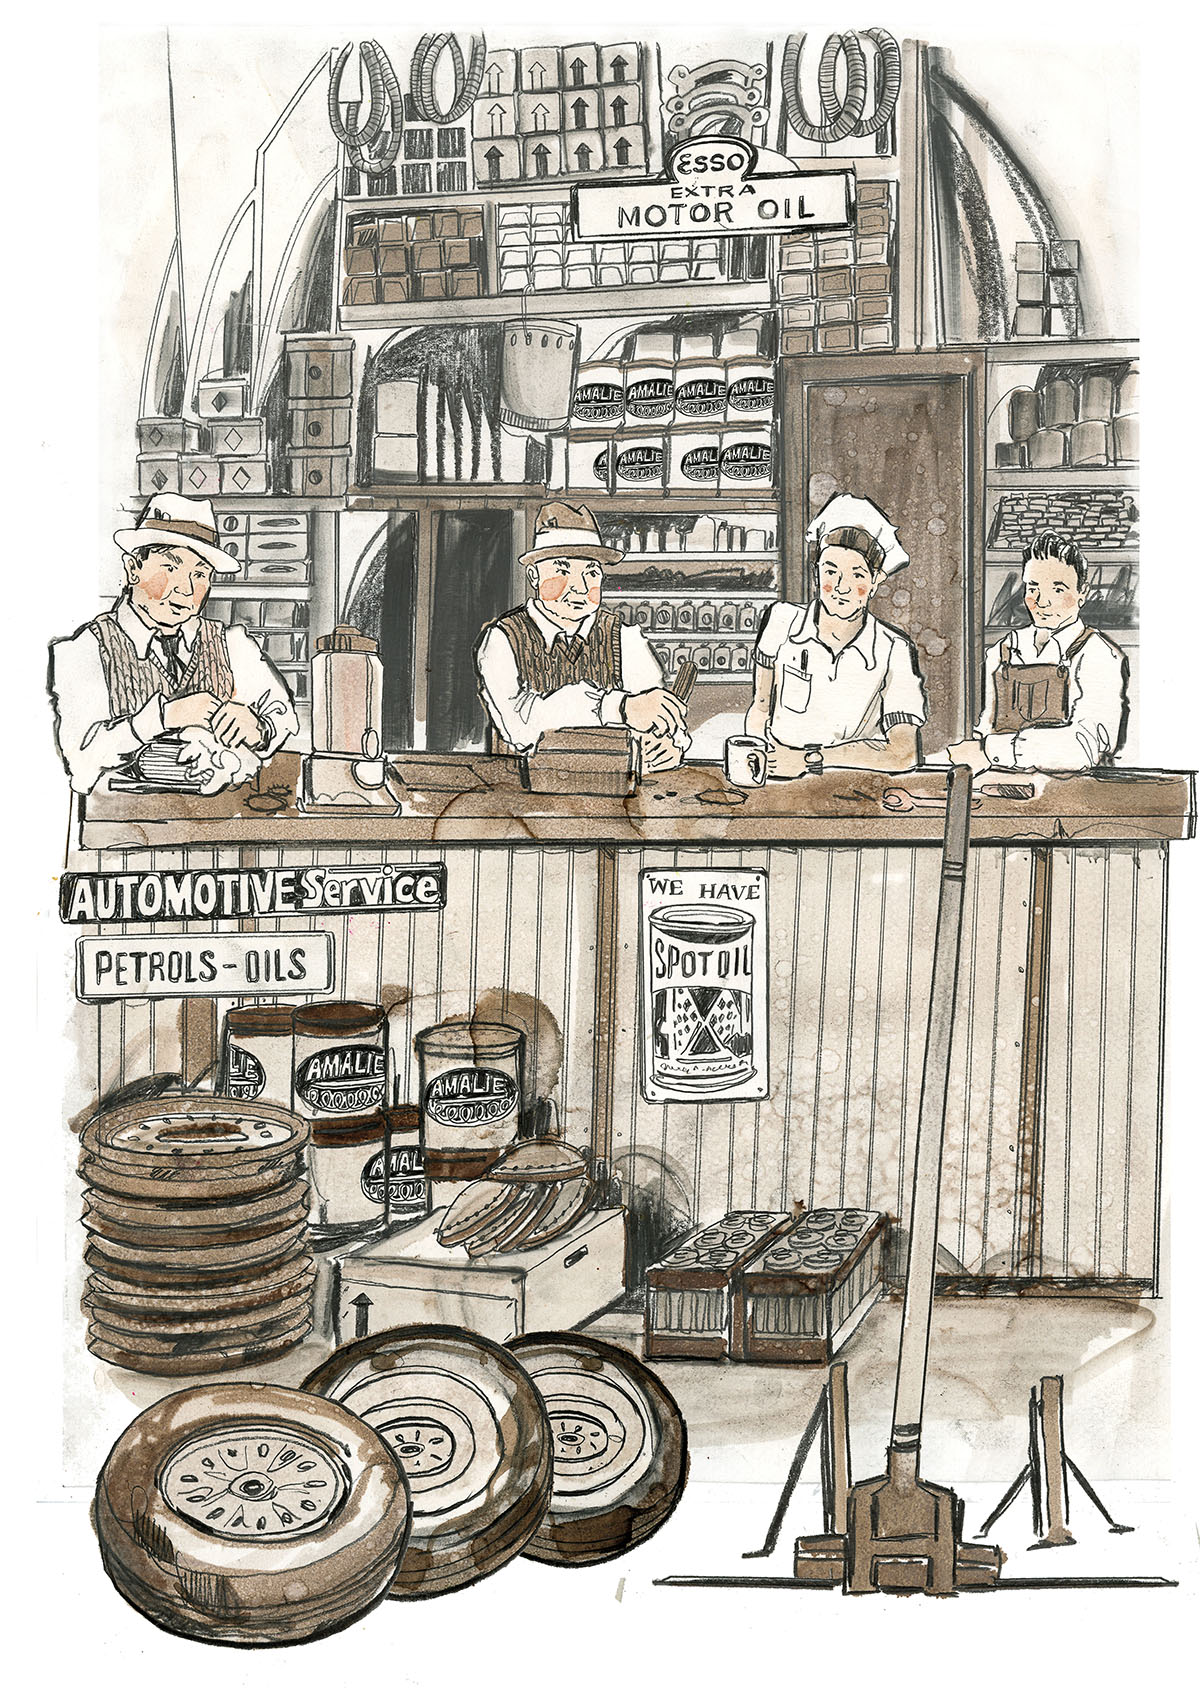 An illustration showing a crowded storefront with four well-dressed employees at a counter